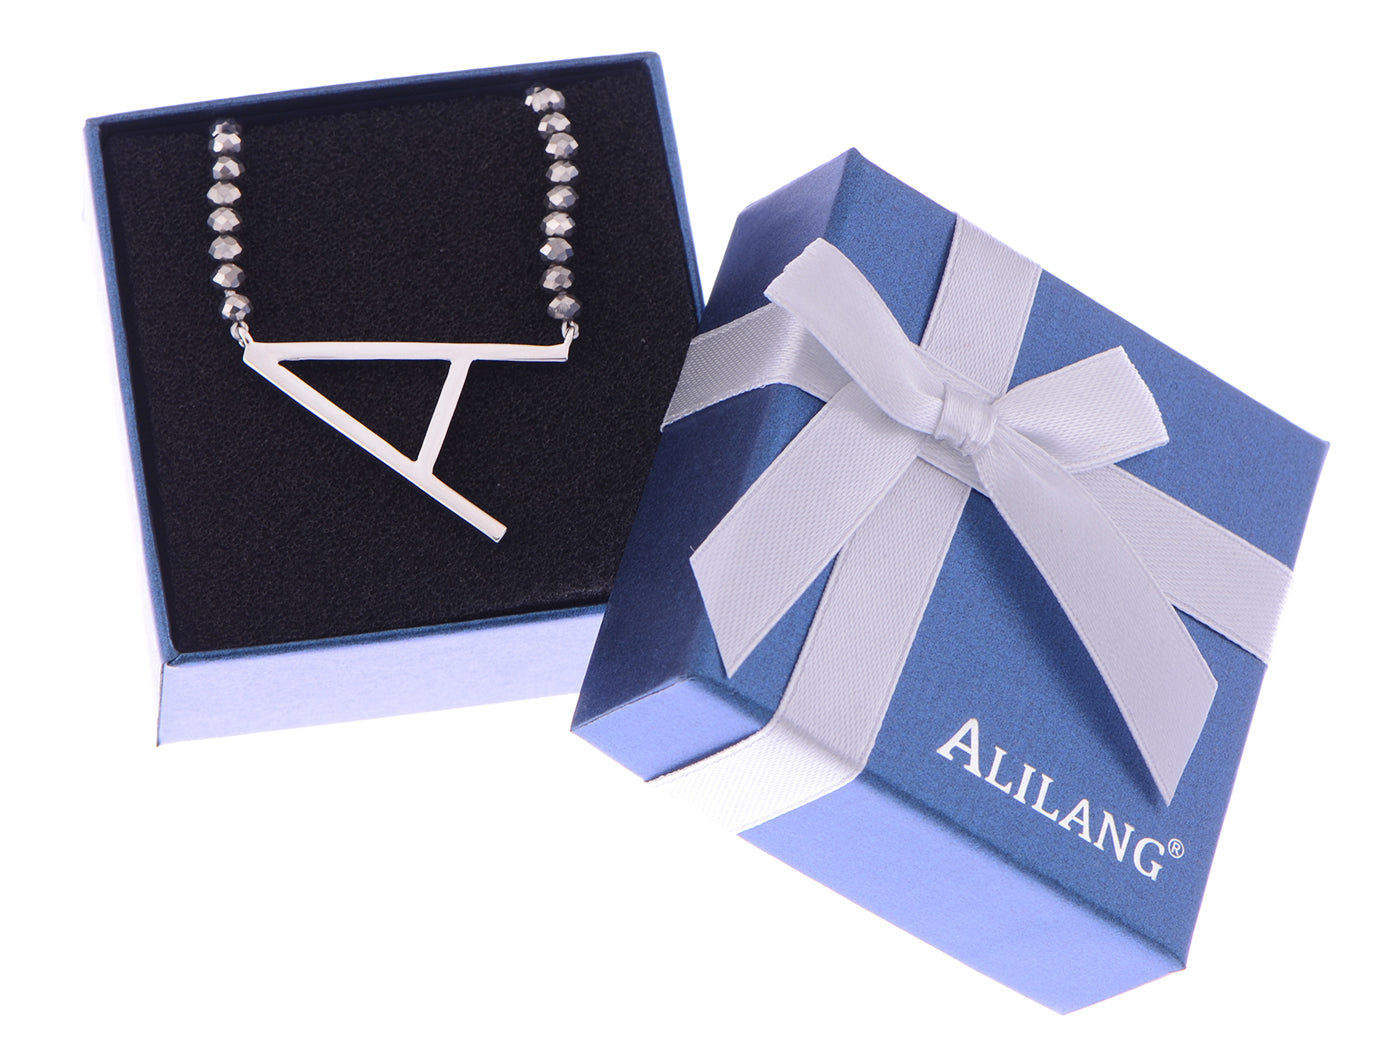 Alilang Stainless Steel Initial Letter A Pendant Necklace Jewelry with Beaded Ball Chain for Girls and Women